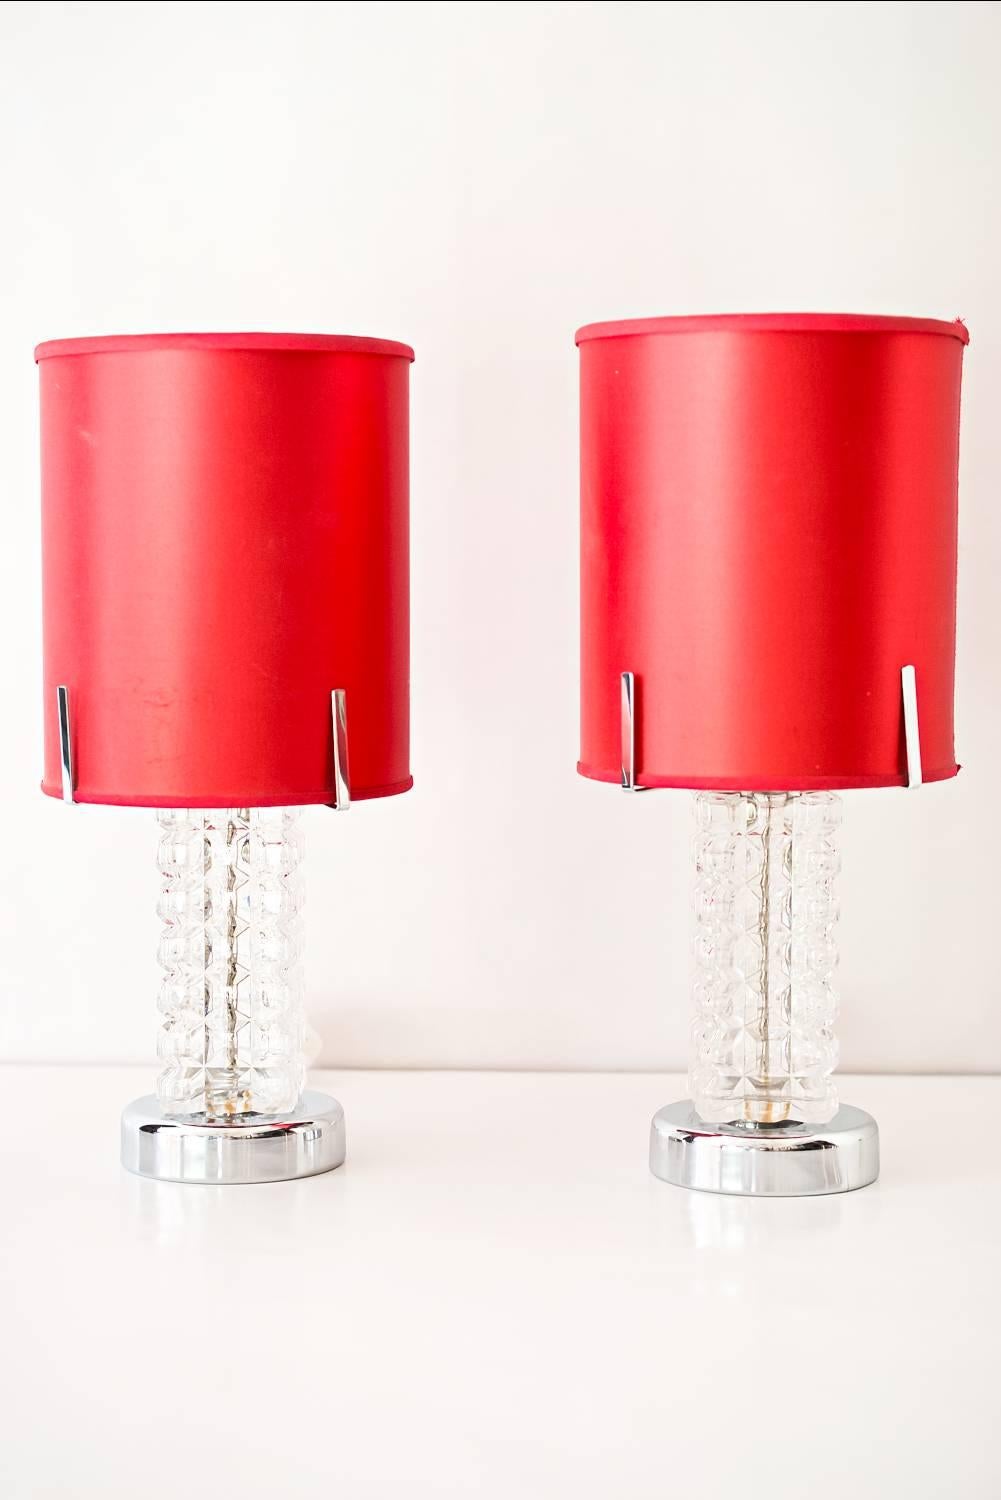 Two austrolux table lamps with original red fabric shade
Original condition.